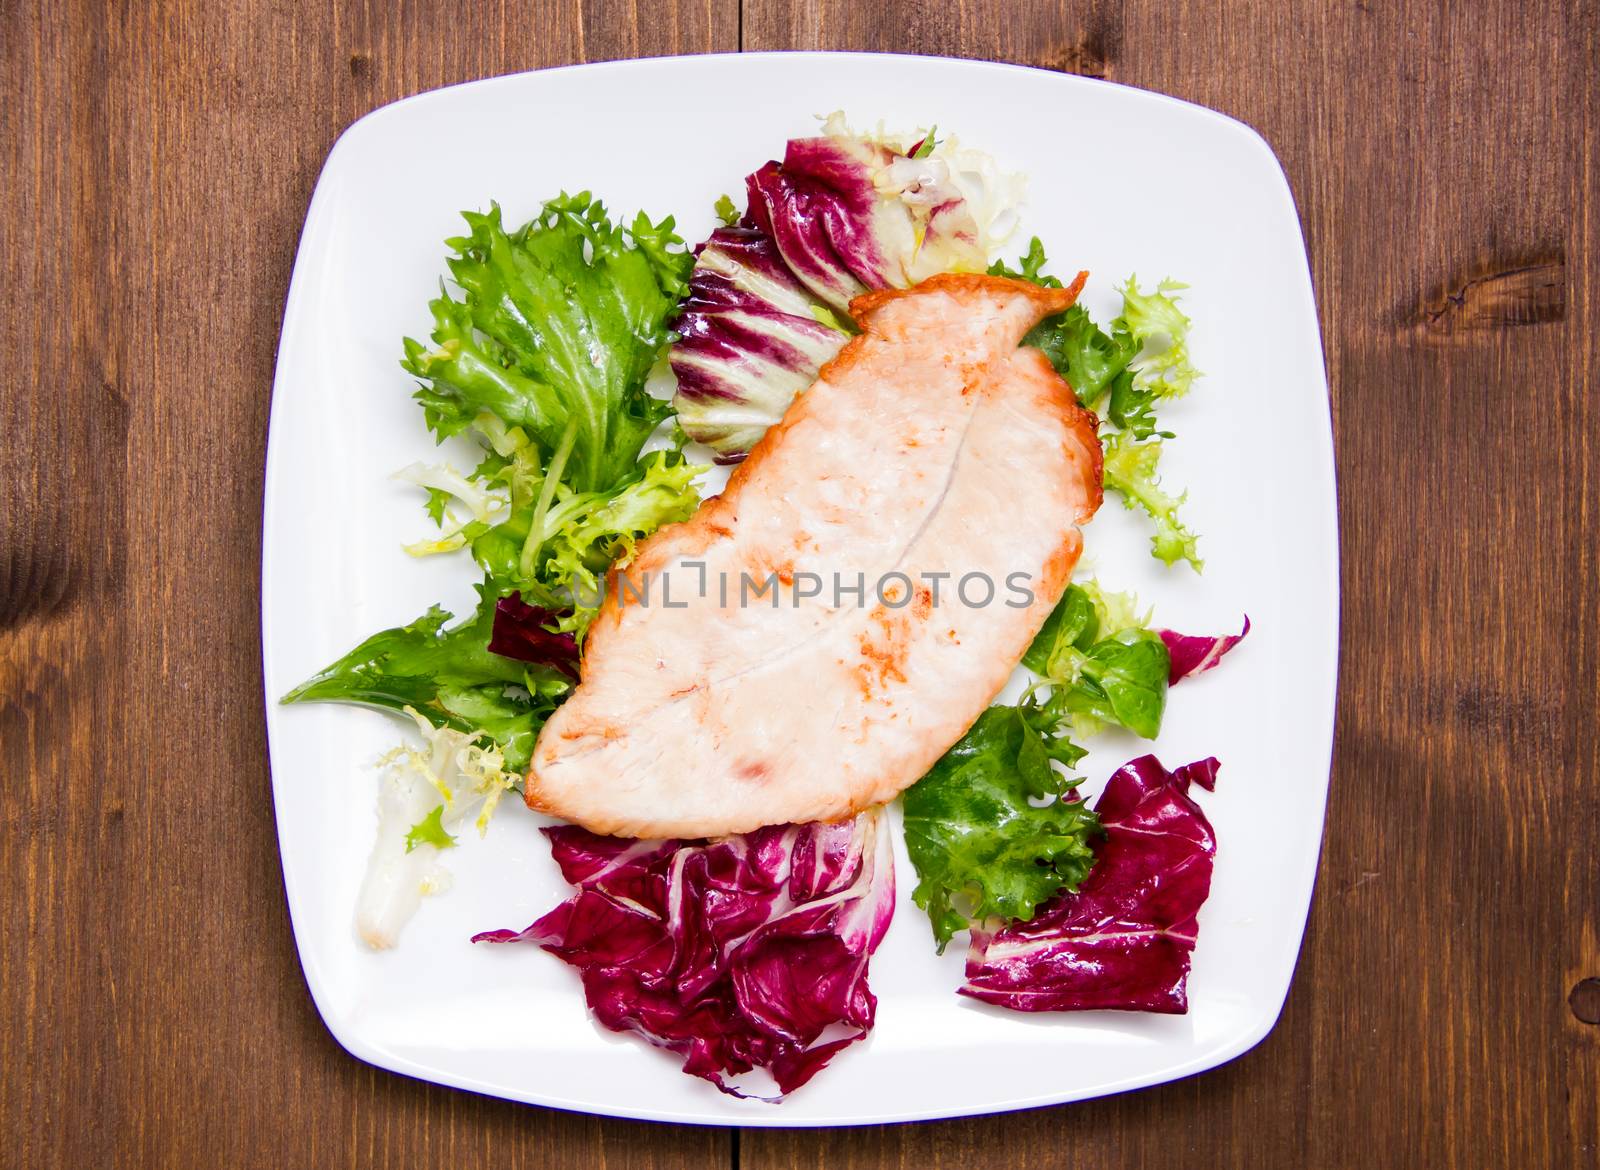 Chicken and salad on wood from above by spafra